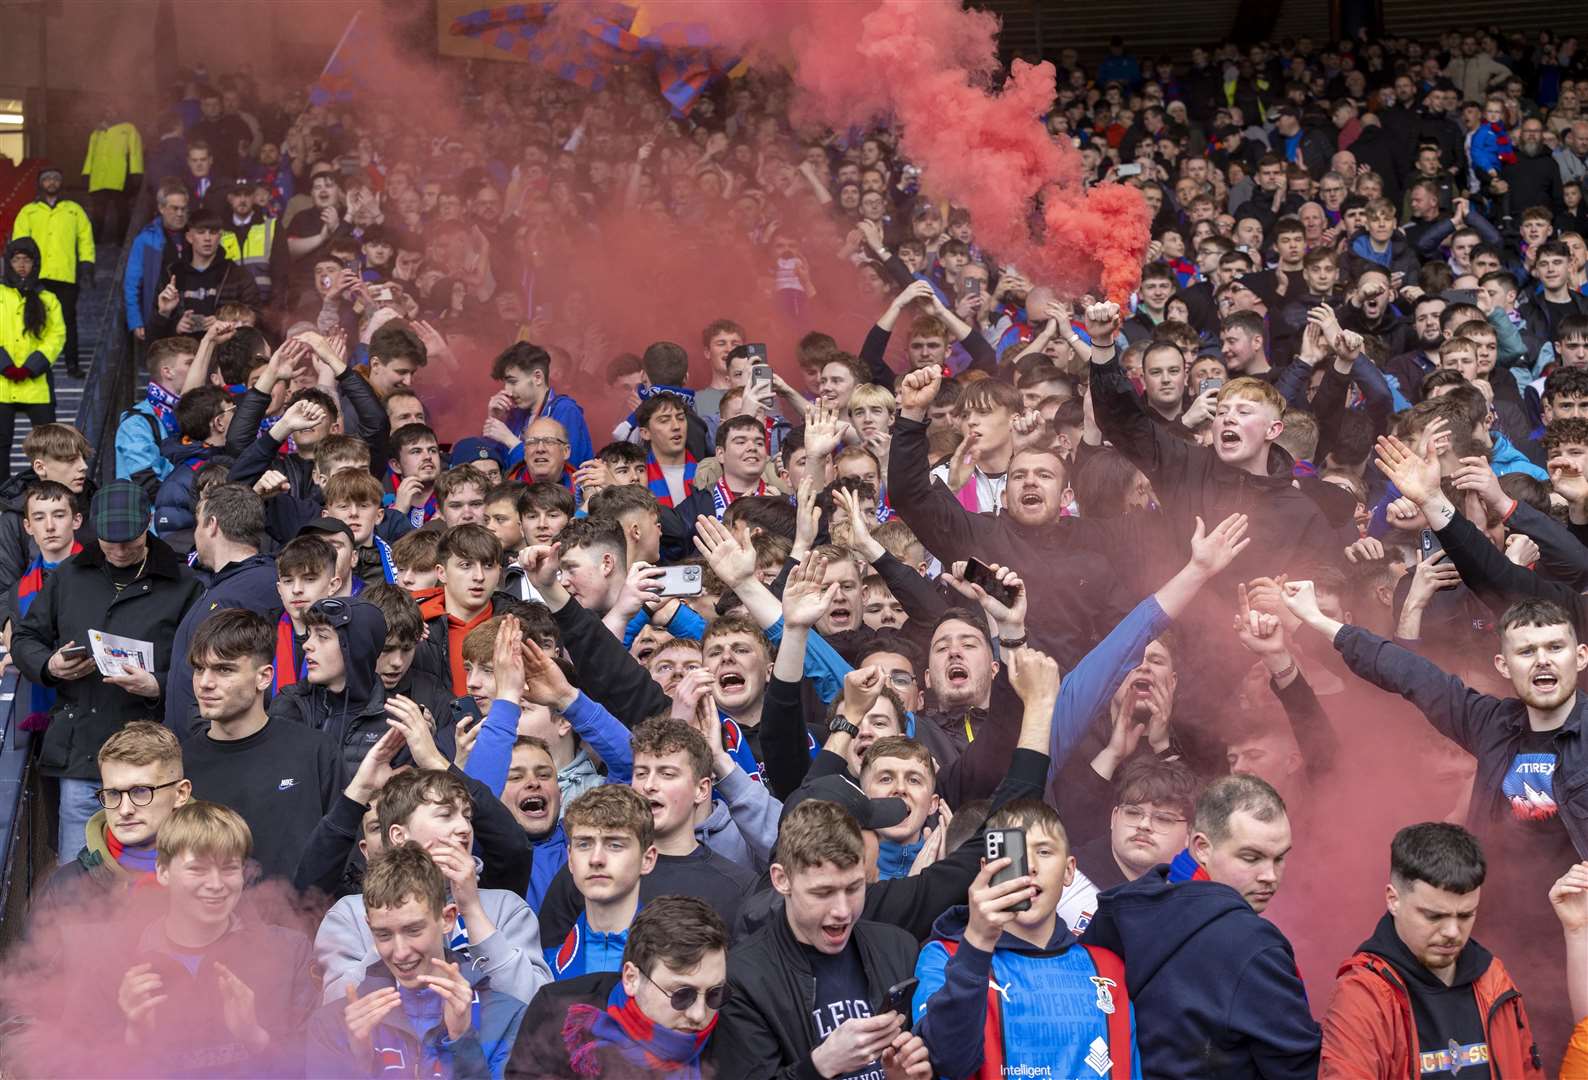 Over 4000 Inverness Caledonian Thistle fans watched them beat Falkirk in the semi final.